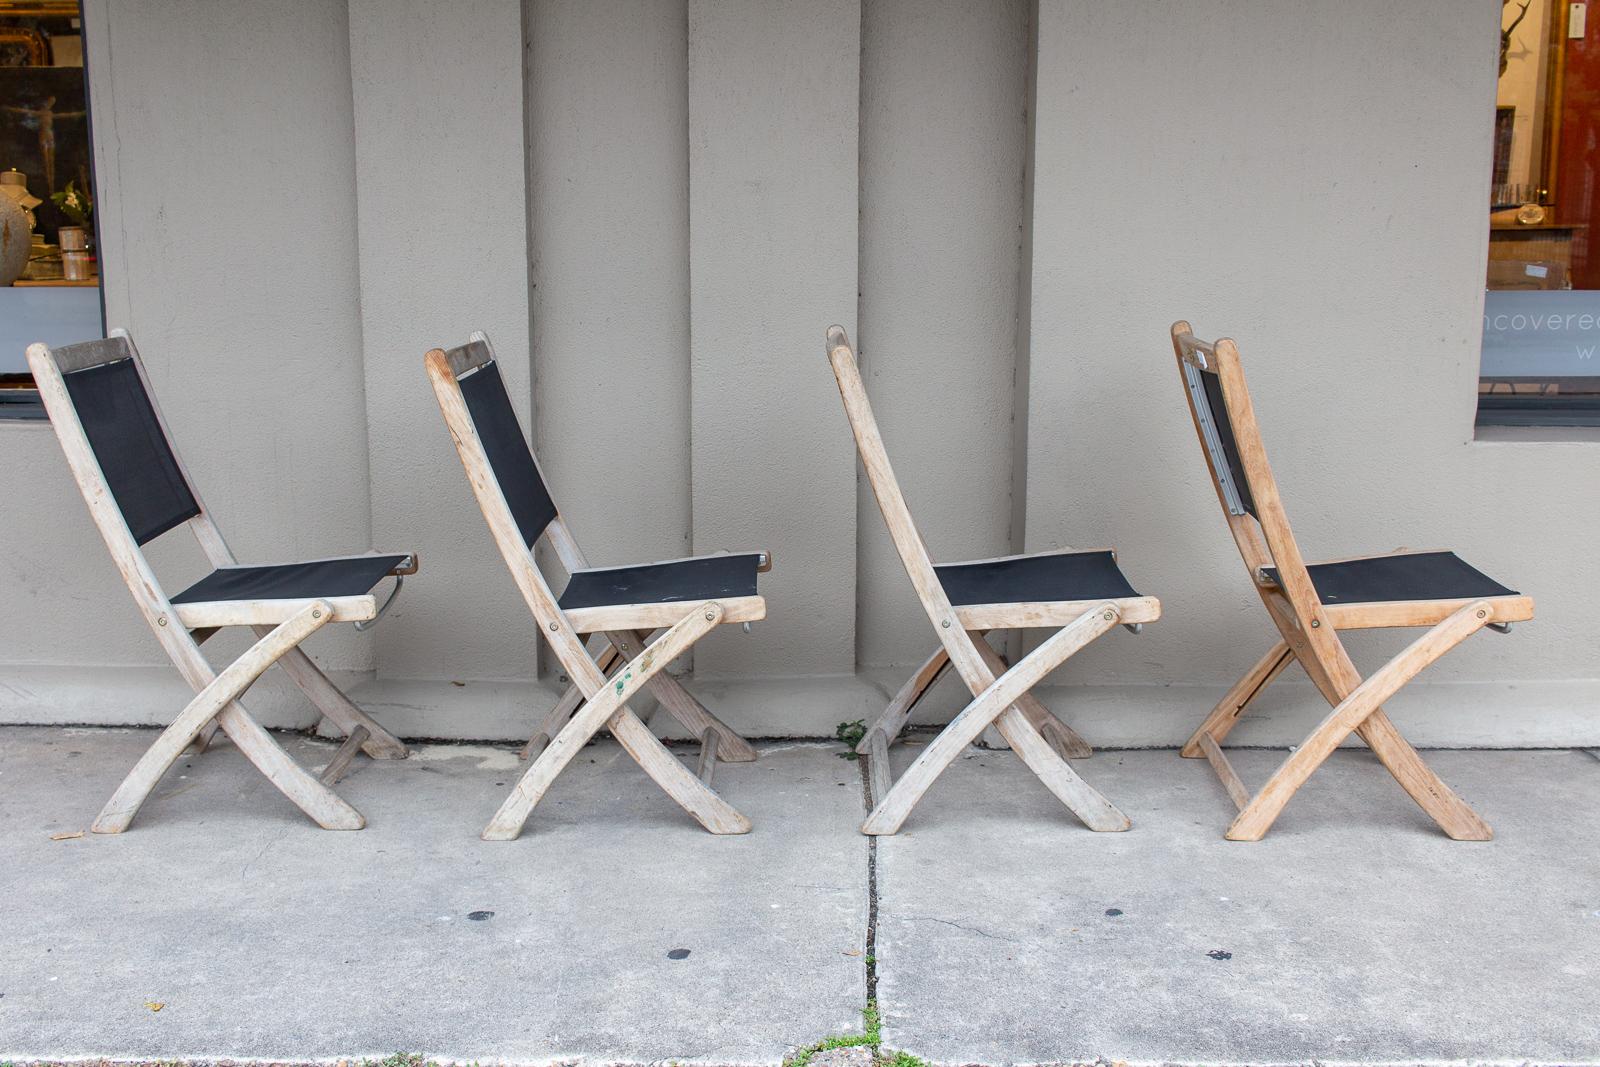 A set of four folding chairs crafted with teak, aluminum, and nylon mesh. These chairs are lightweight and easy to carry, yet quite sturdy and attractive. The nylon mesh back and seat are quite durable, while the teak has aged to a beautiful gray